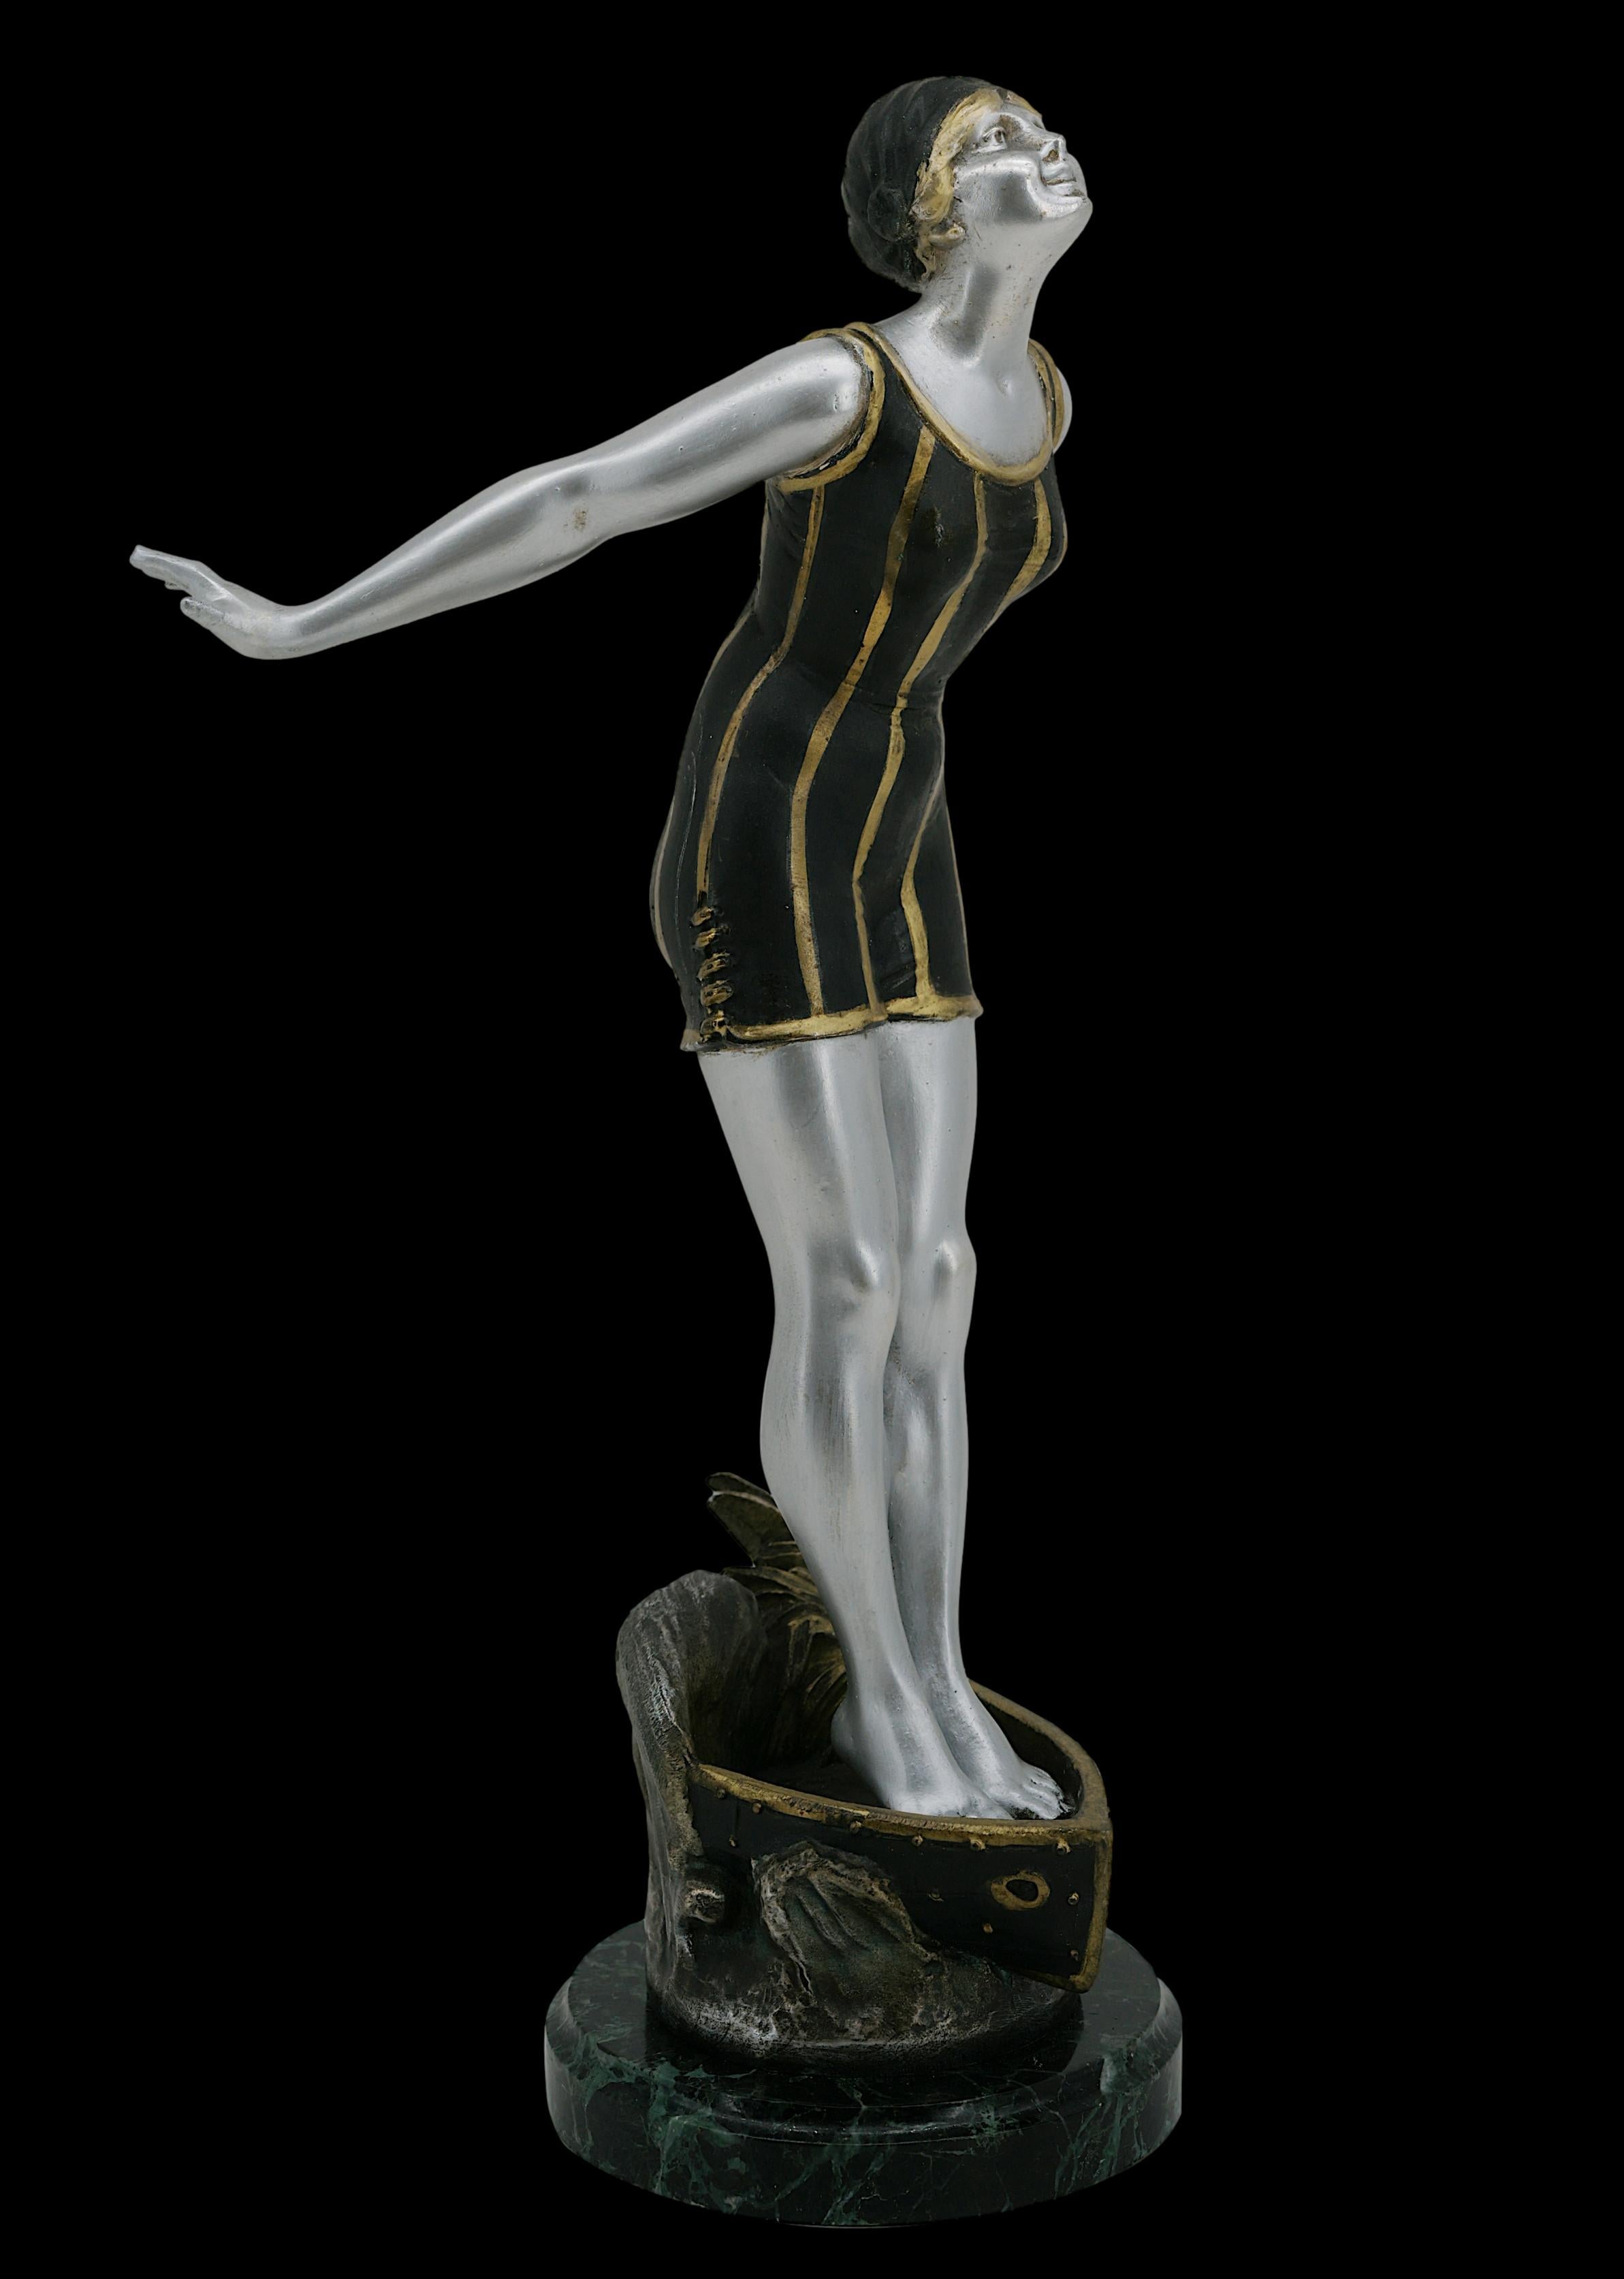 French Art Deco bather sculpture, France, ca.1930. Cold painted spelter and marble. Height : 15